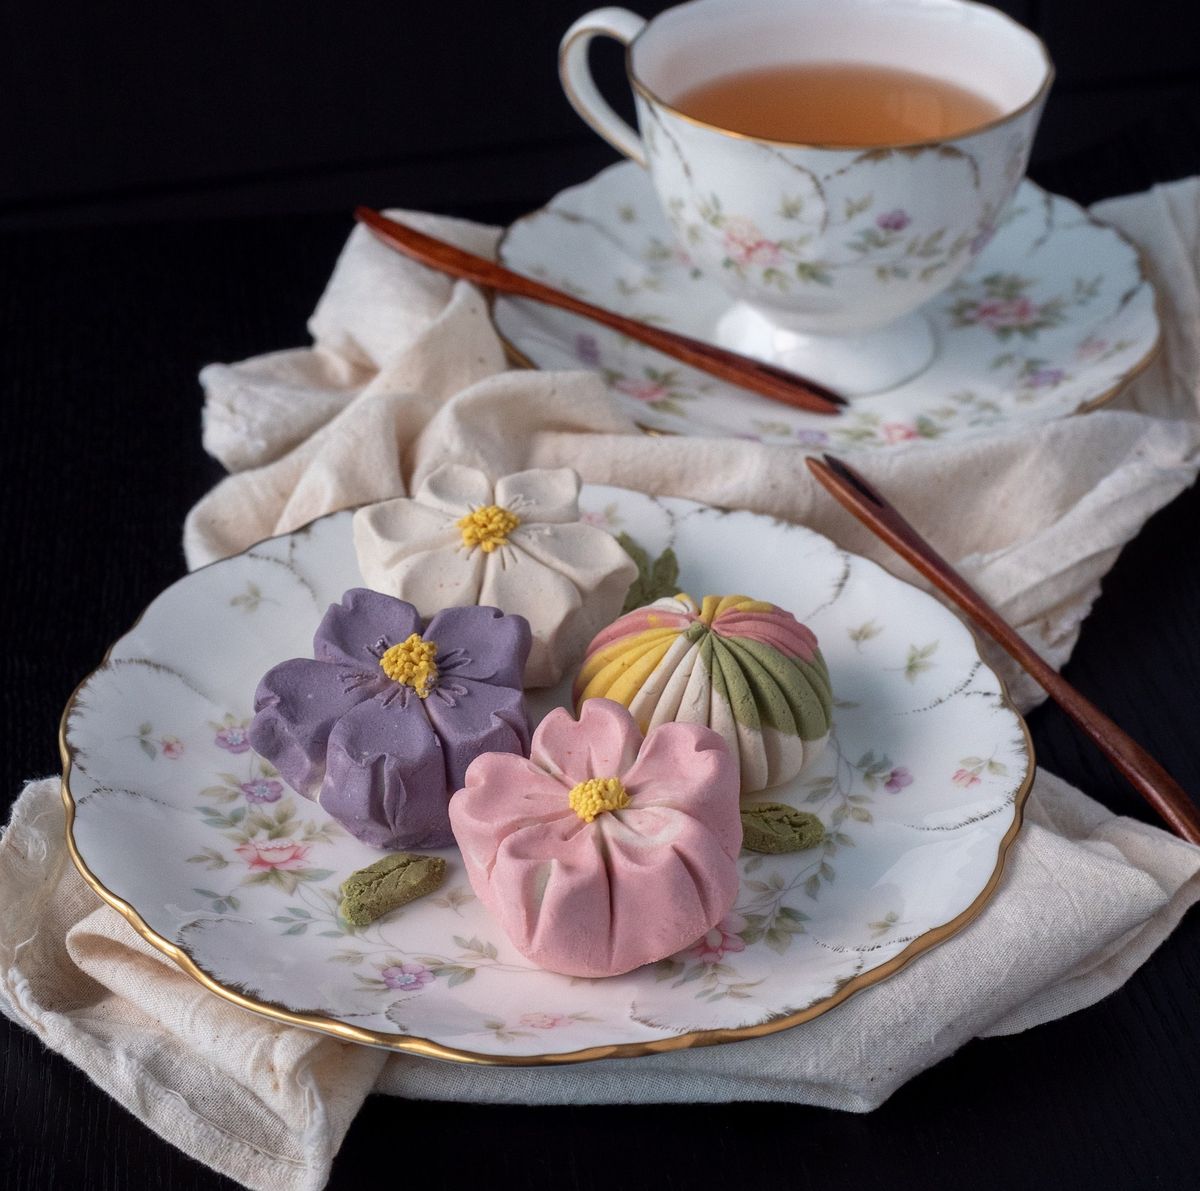 Kyogashi: Luxurious Traditional Confection That's Only Made in Kyoto